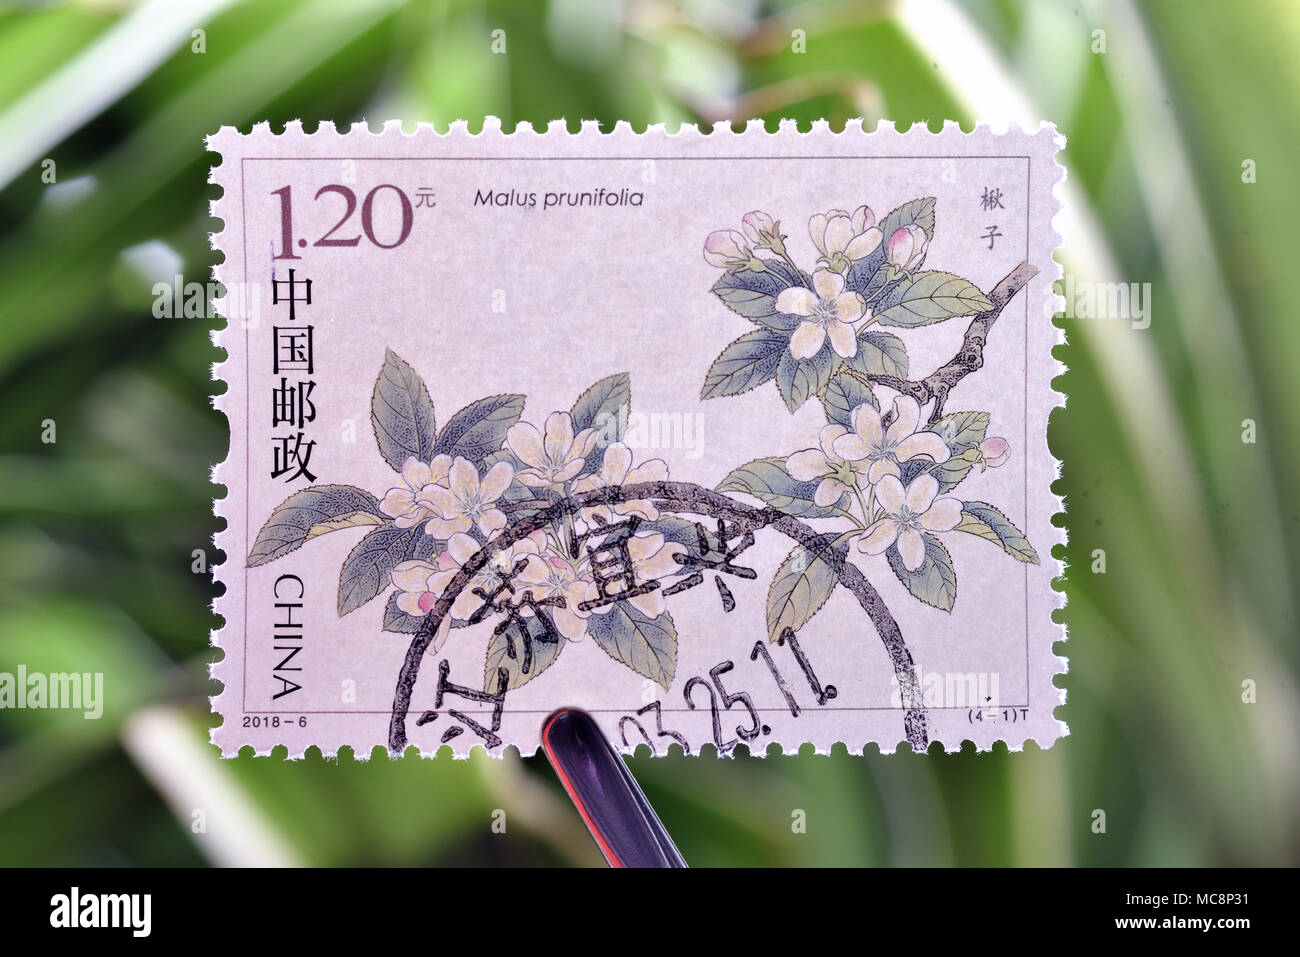 CHINA - CIRCA 2018: A stamps printed in China shows 2018-6 Chinese Flowering Crabapple (4-1), Qiuzi (Malus Prunifolia), 120 fen, 40 * 30 mm, circa 201 Stock Photo